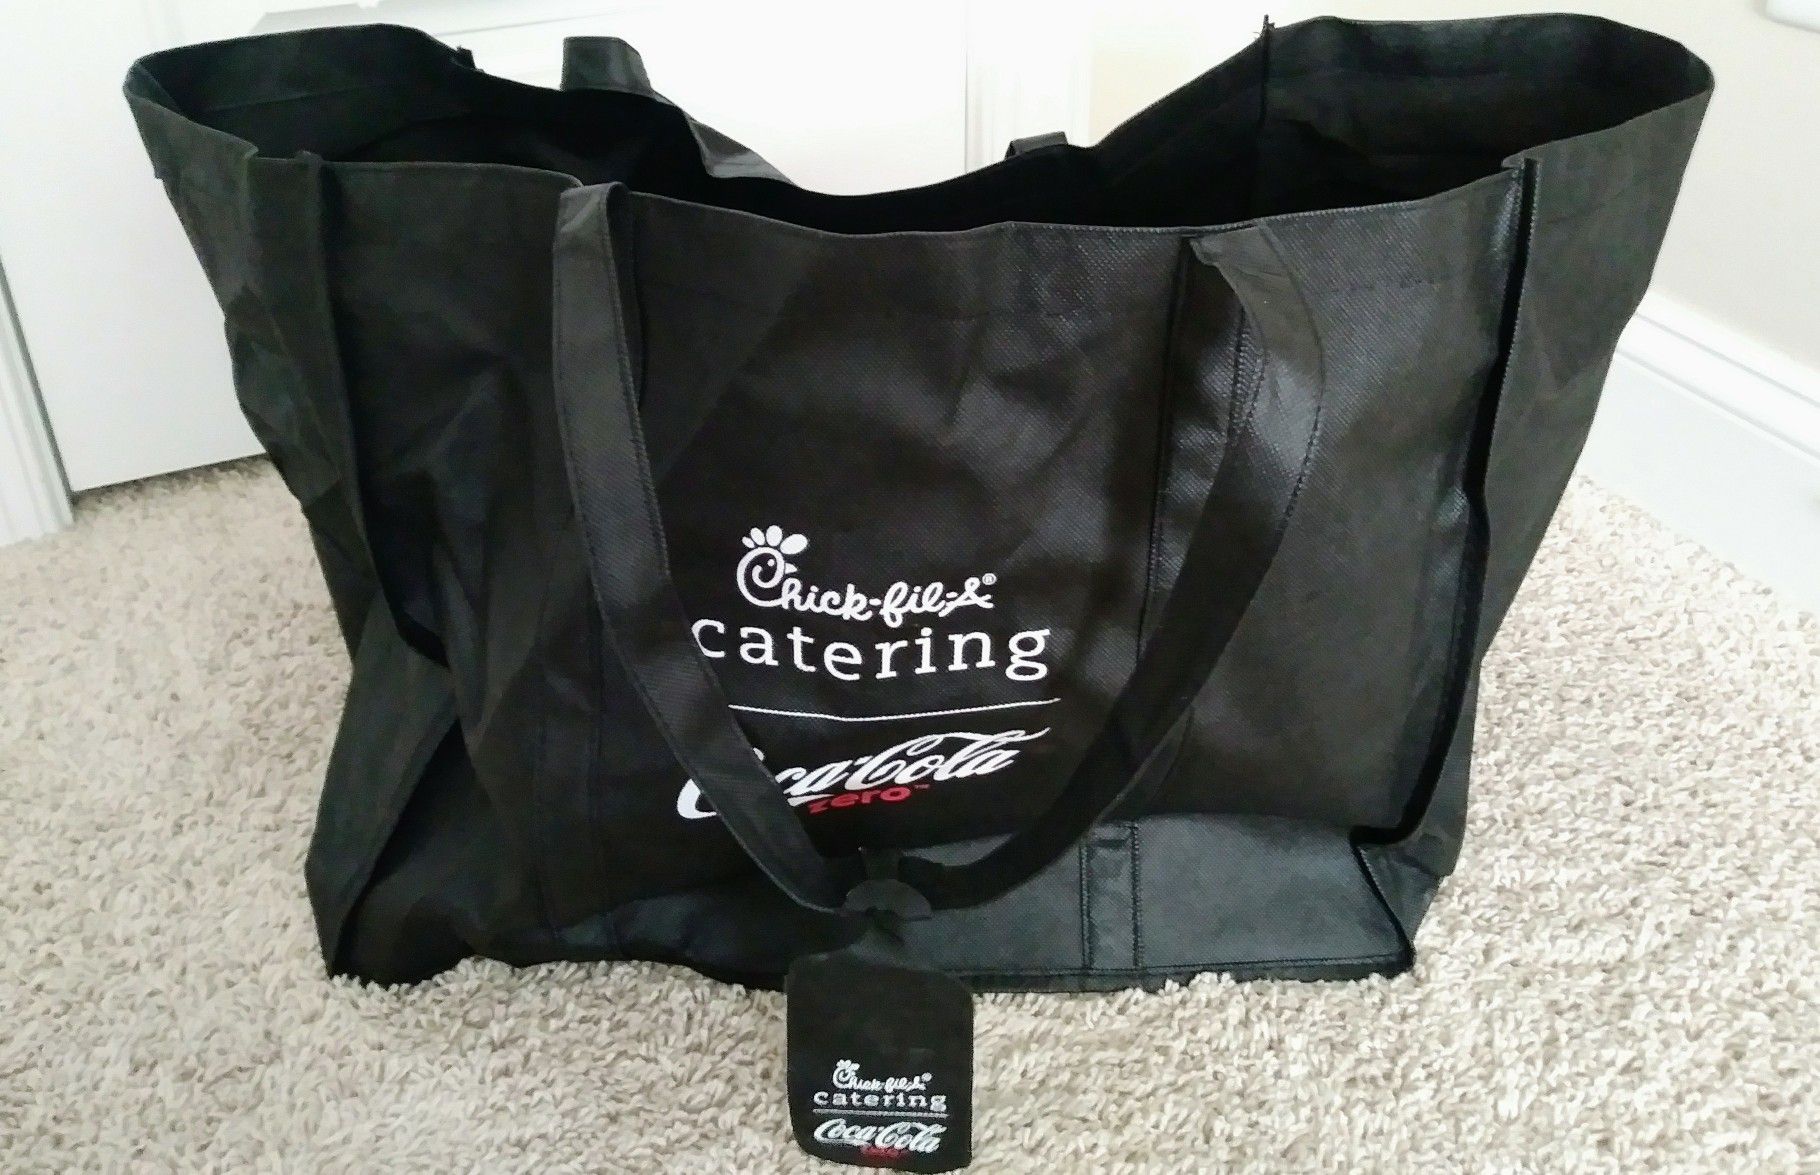 Seal a Meal Rival + Bags $18 for Sale in East Northport, NY - OfferUp